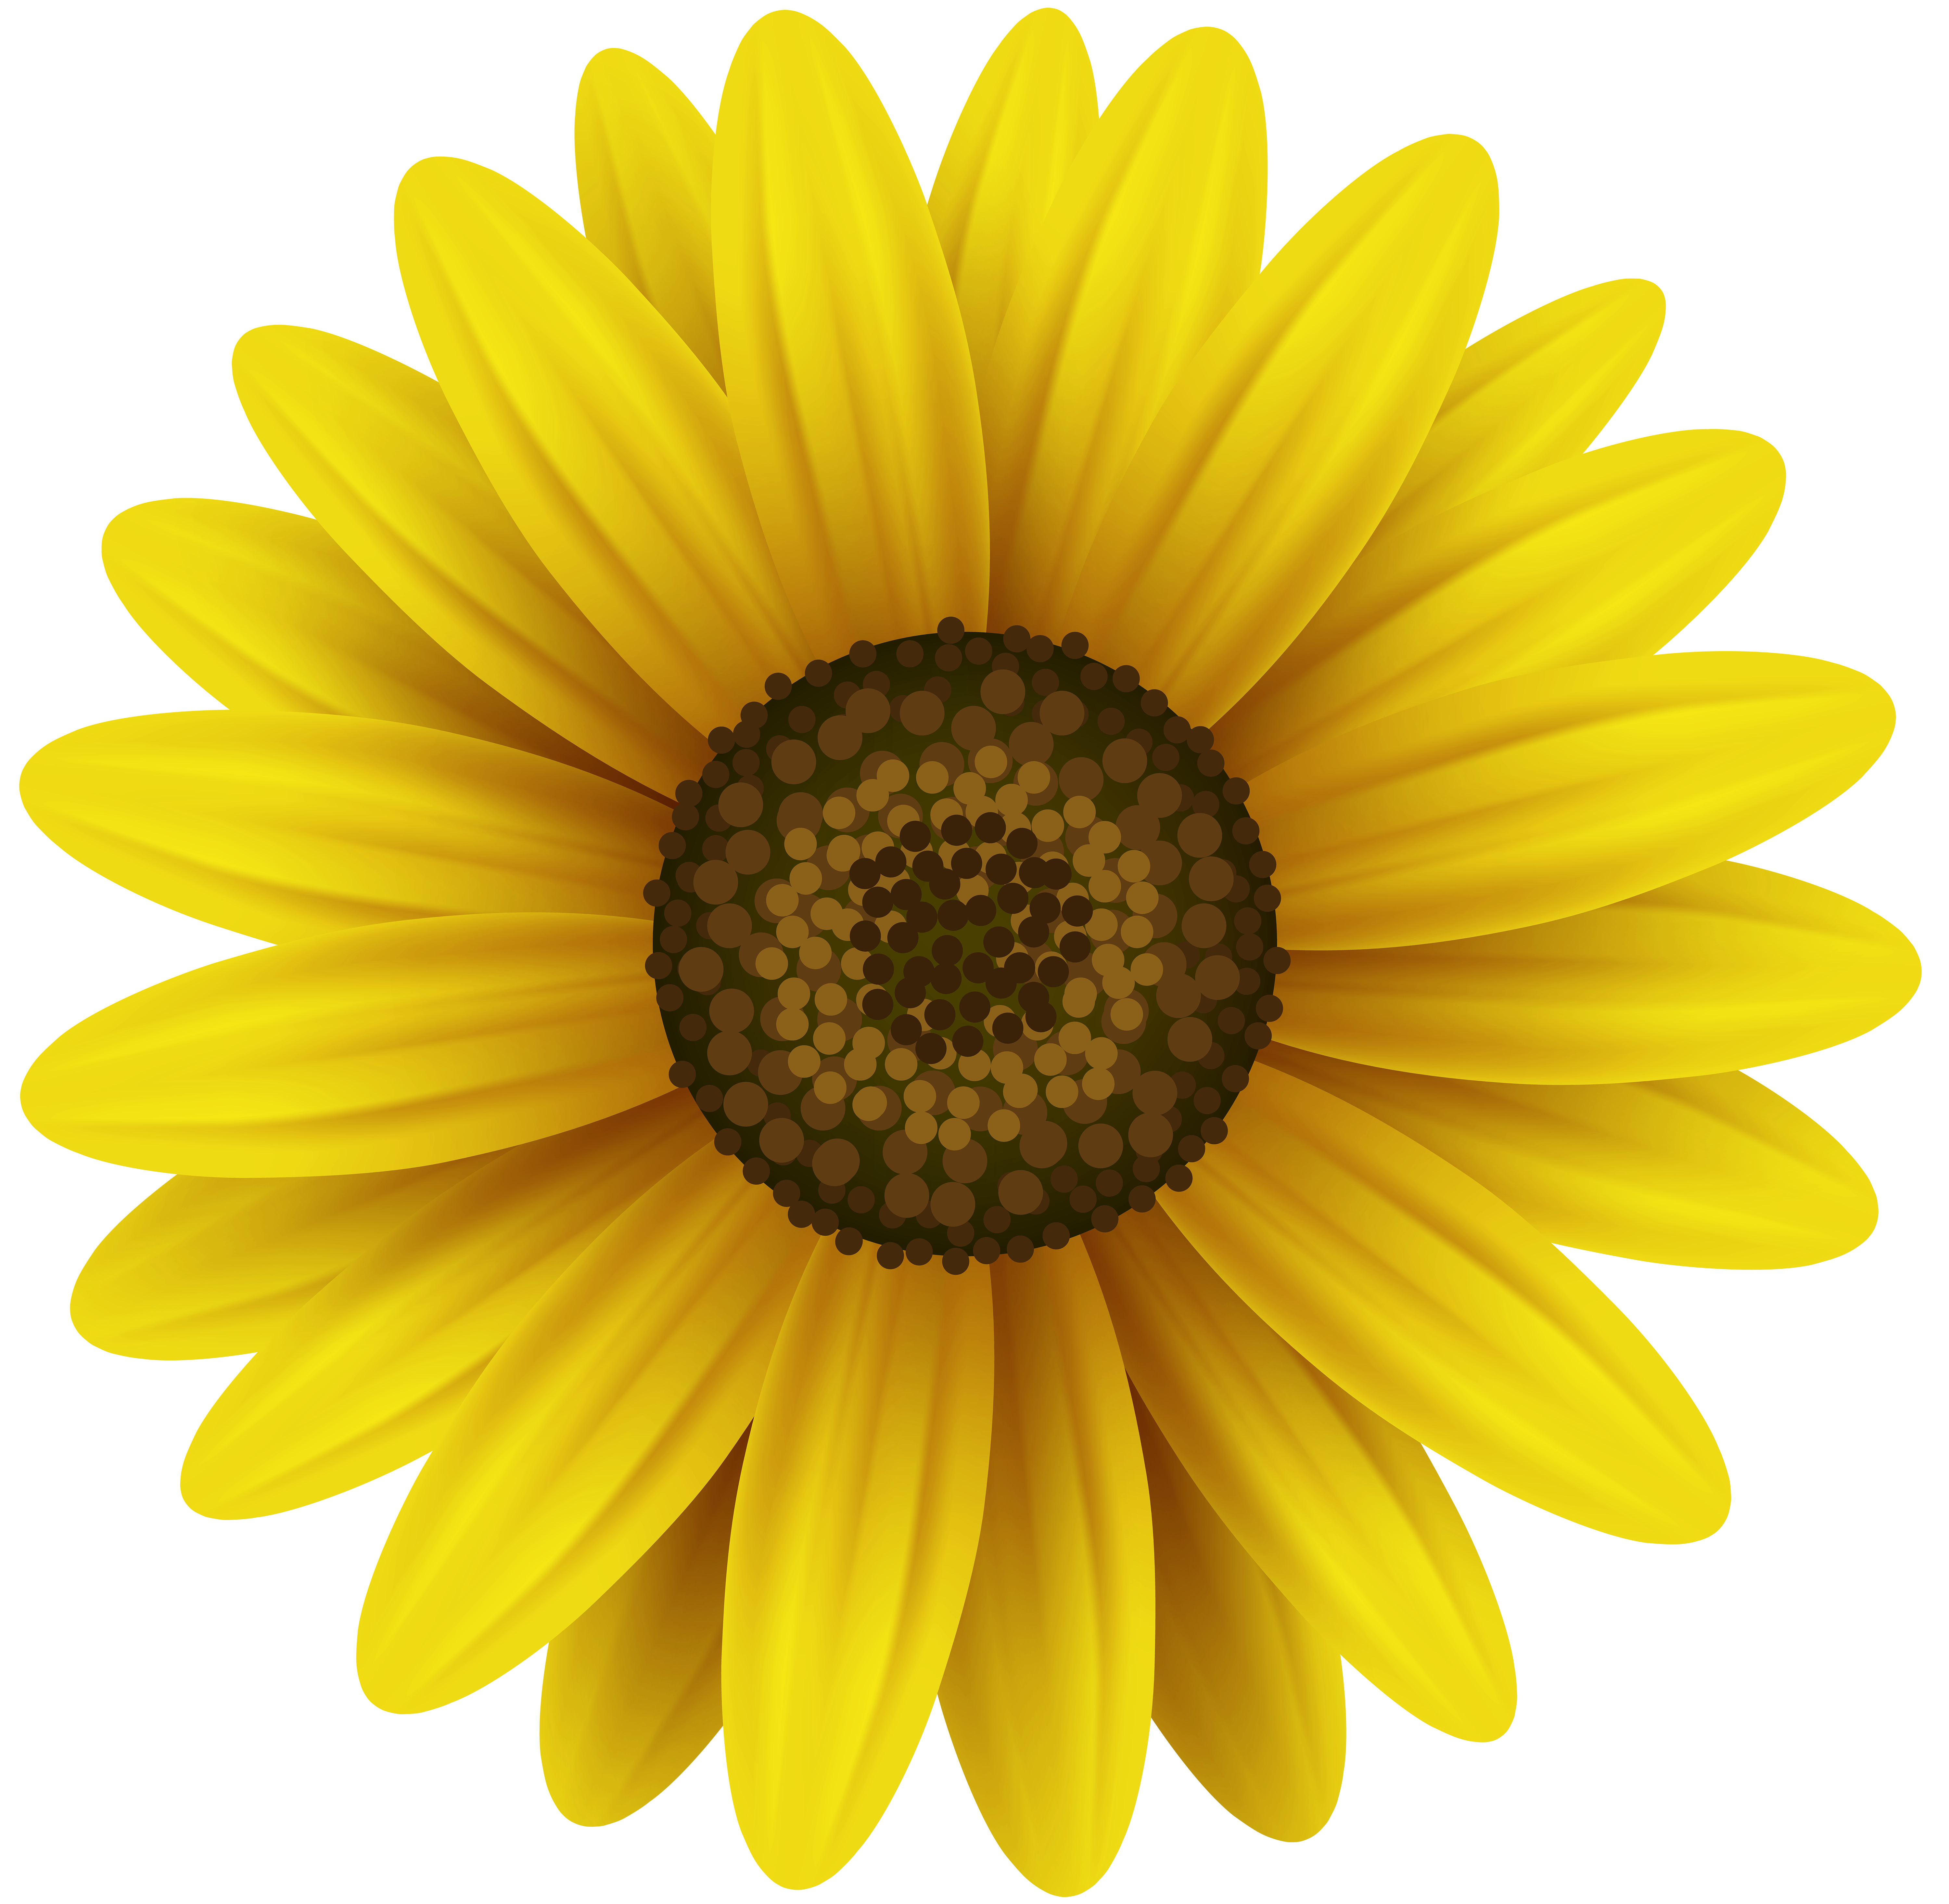 yellow flowers clipart